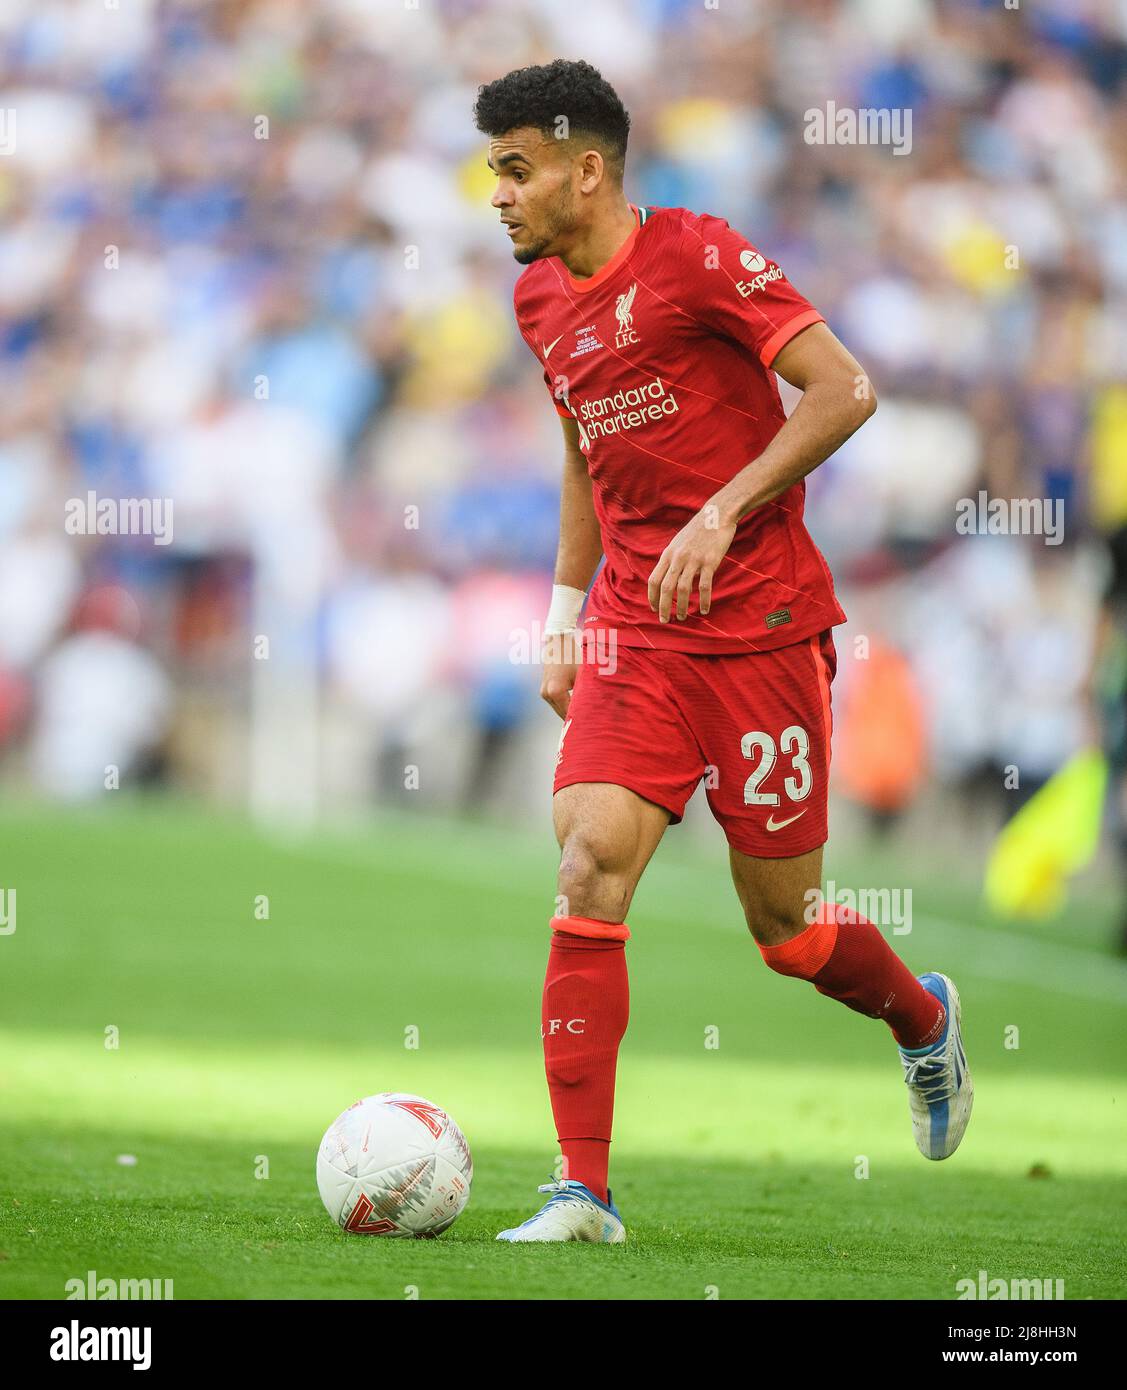 14 May 2022 - Chelsea v Liverpool - Emirates FA Cup Final - Wembley Stadium  Luis Diaz during the FA Cup Final at Wembley Stadium Picture Credit : © Mark Pain / Alamy Live News Stock Photo